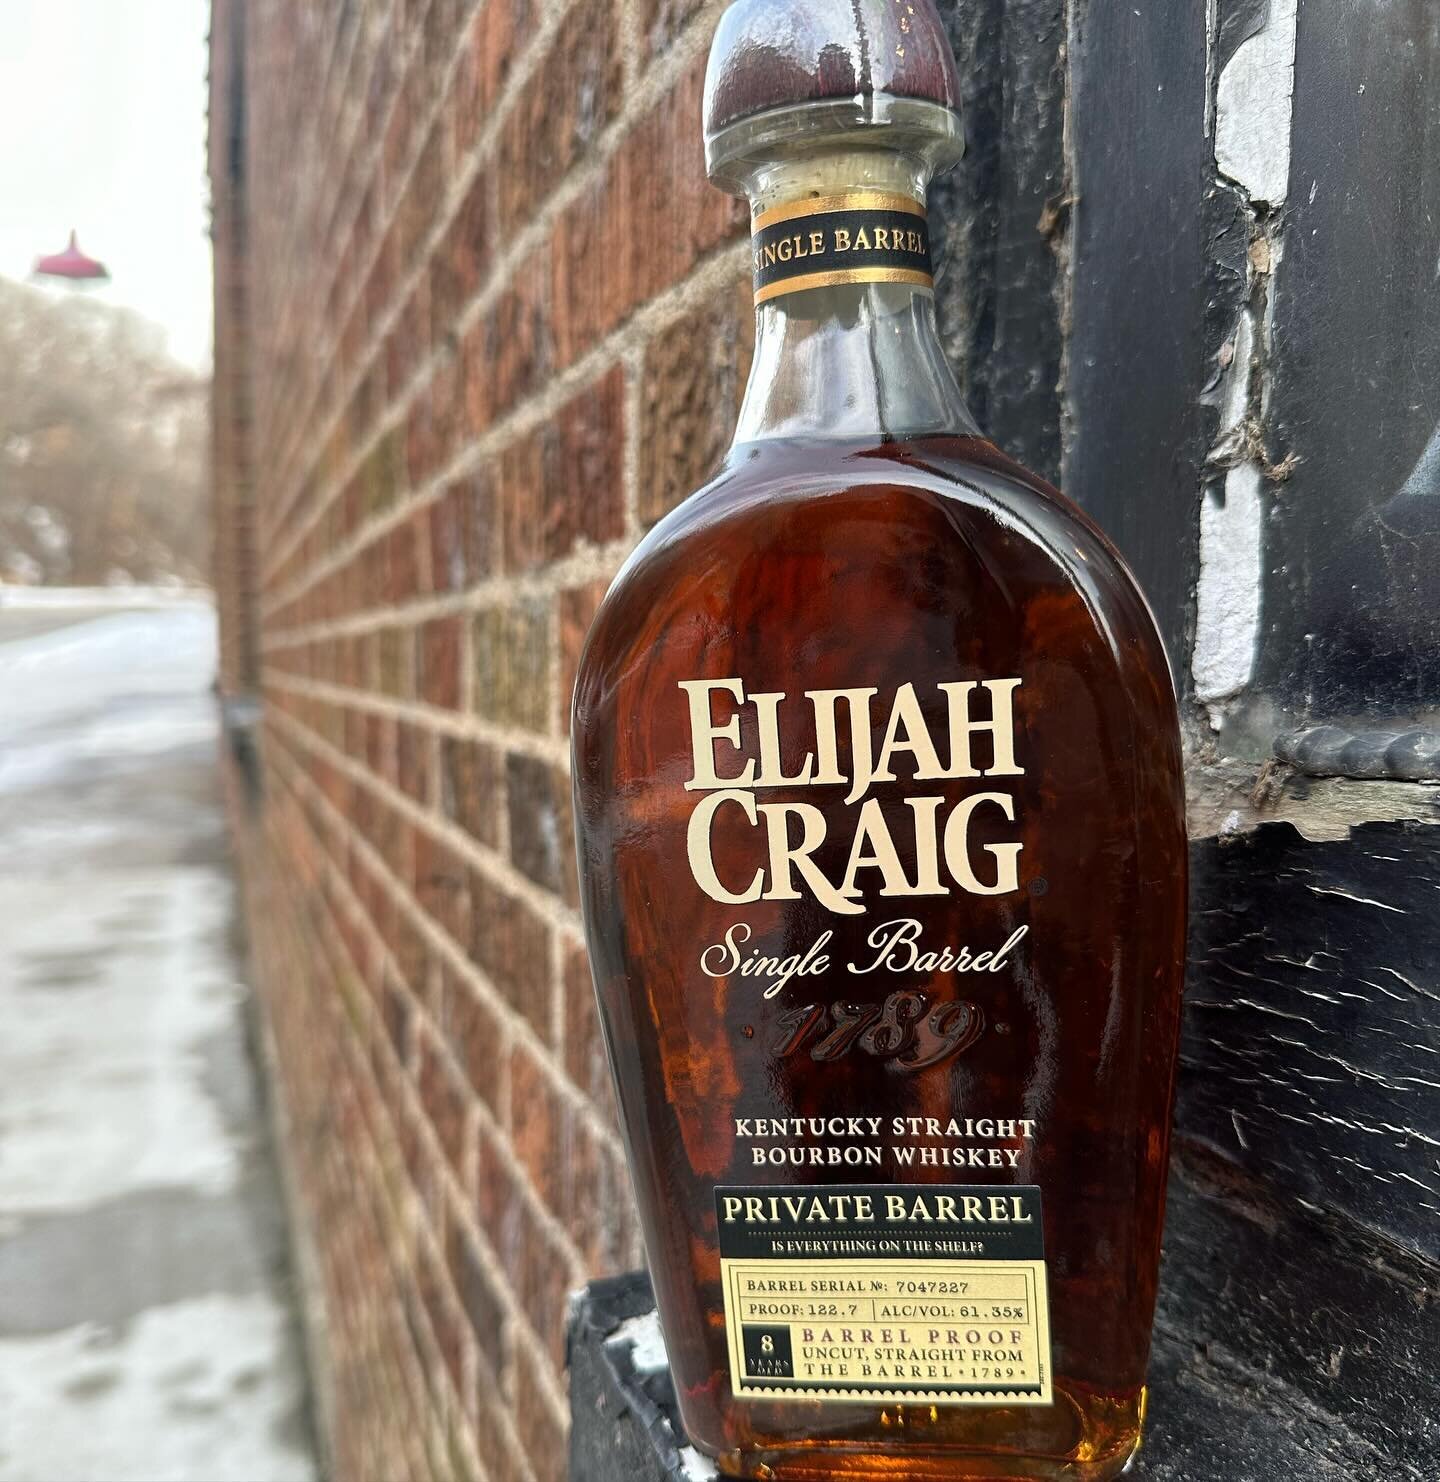 Our latest Single Barrel Store pick @elijahcraig #fullproof has arrived and we will be releasing it at 6pm on Thursday Feb 22nd. 

This one is at full proof and didn&rsquo;t produce a ton of bottles. We will have 72 bottles for sale on Thursday at 6p